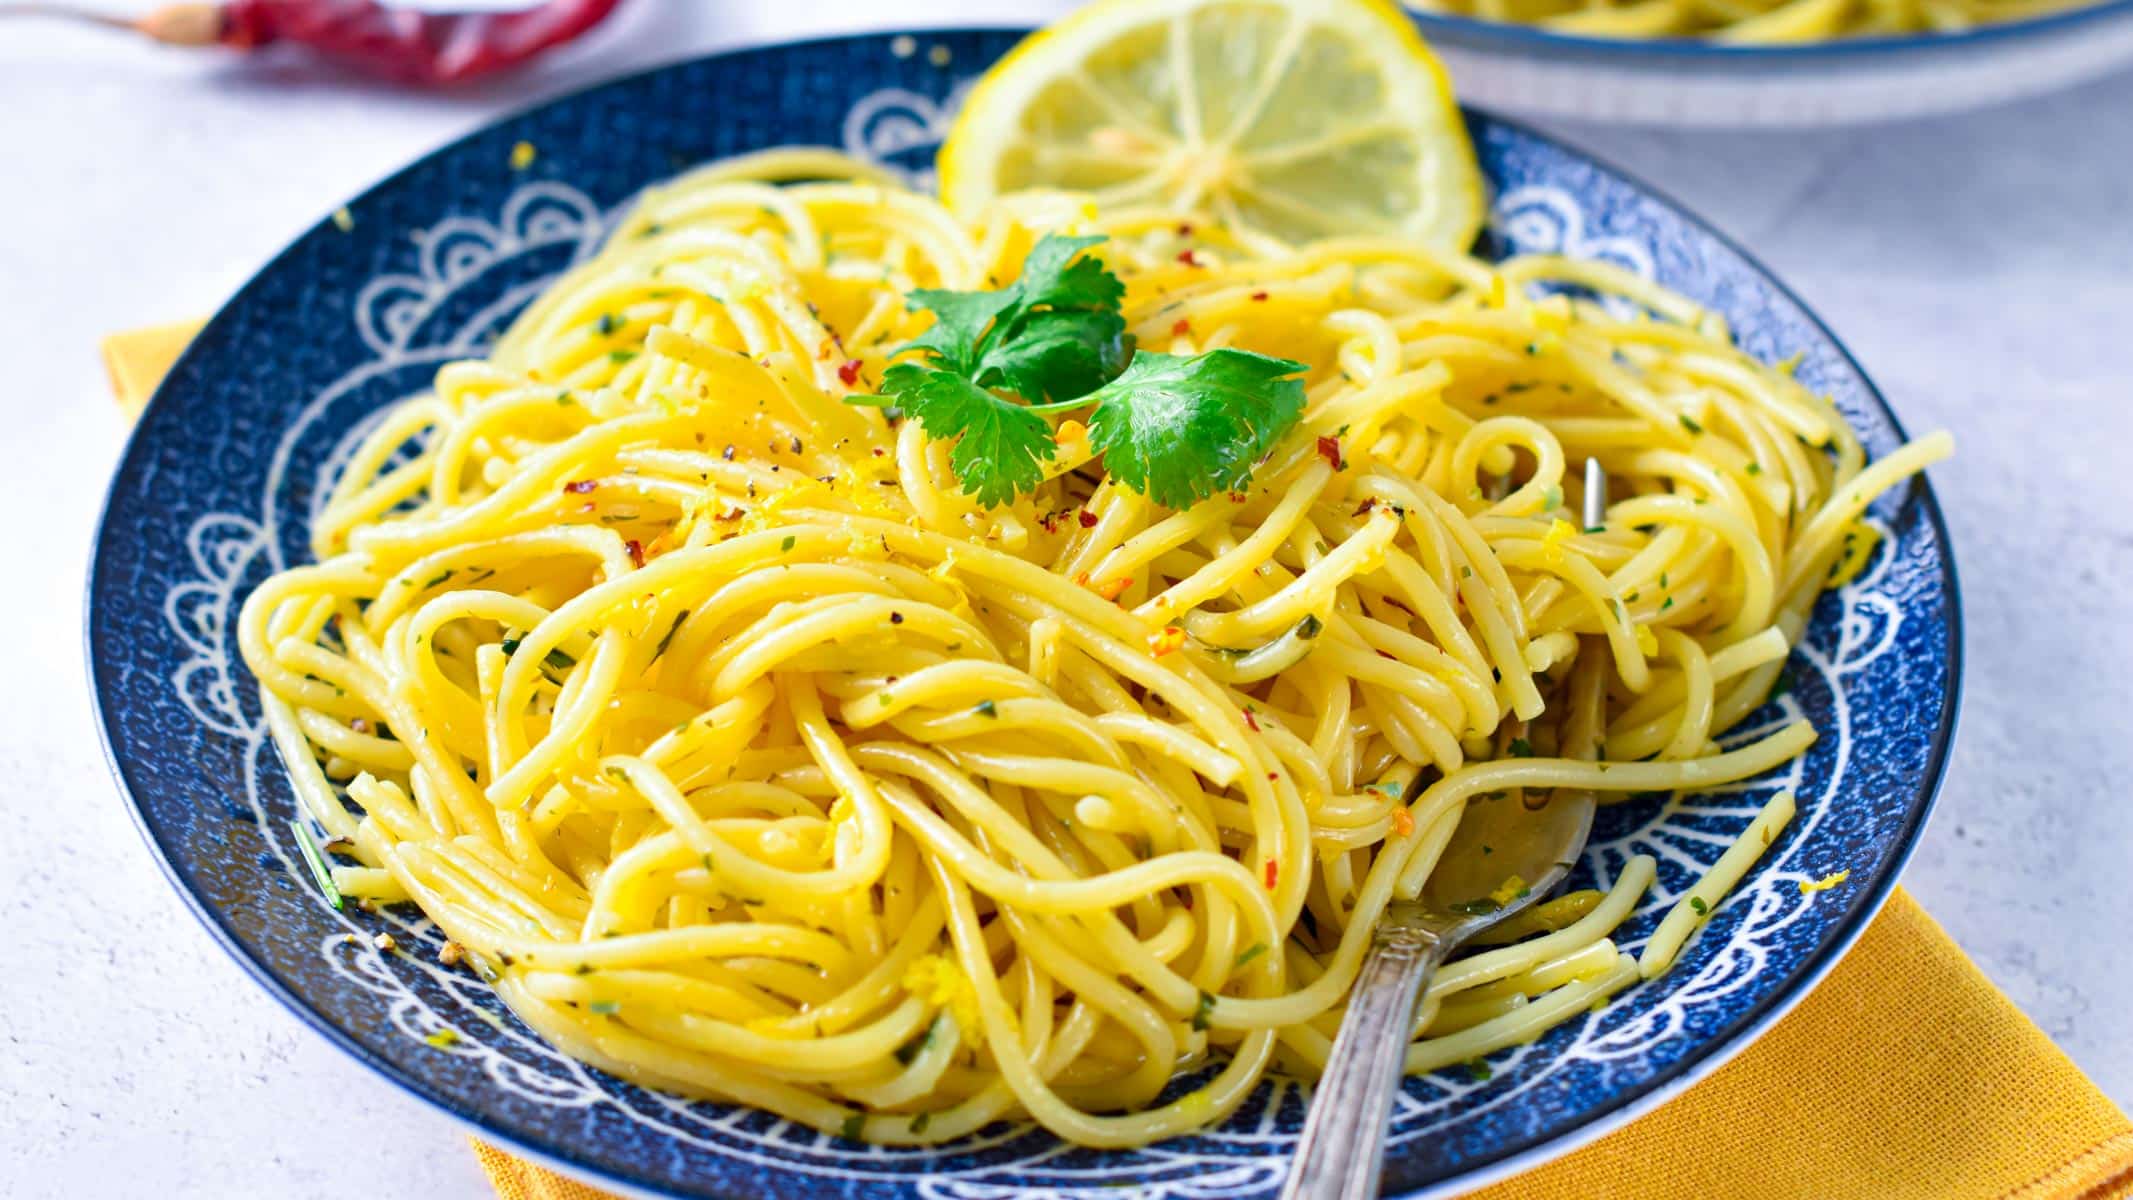 These Lemon Garlic Pasta is the most easy, light and refreshing dinner packed with healthy fat from olive oil and anti-inflammatory garlic and lemons. Plus, the recipe works with any kind of pasta and you can make it gluten-free or low-carb if needed